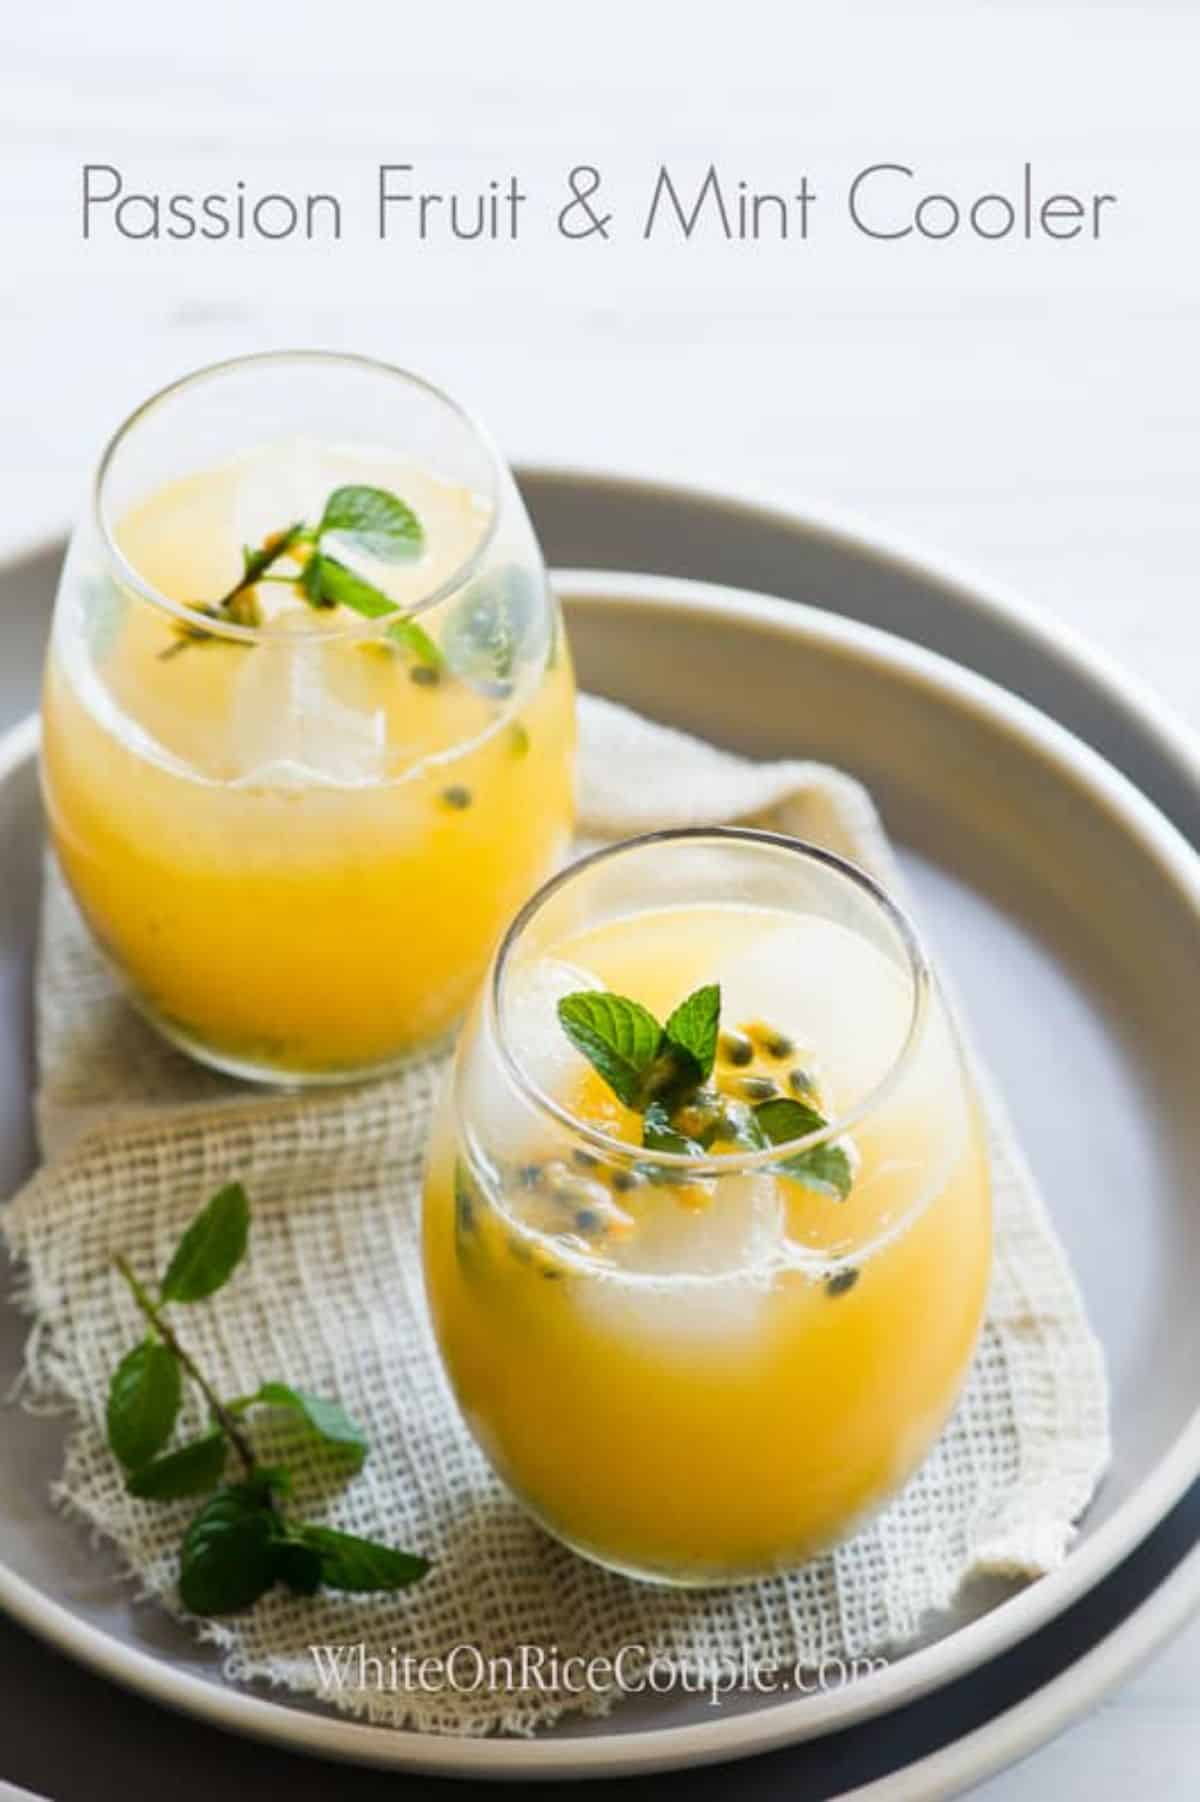 Refreshing passion fruit cooler in glass cups on a tray.